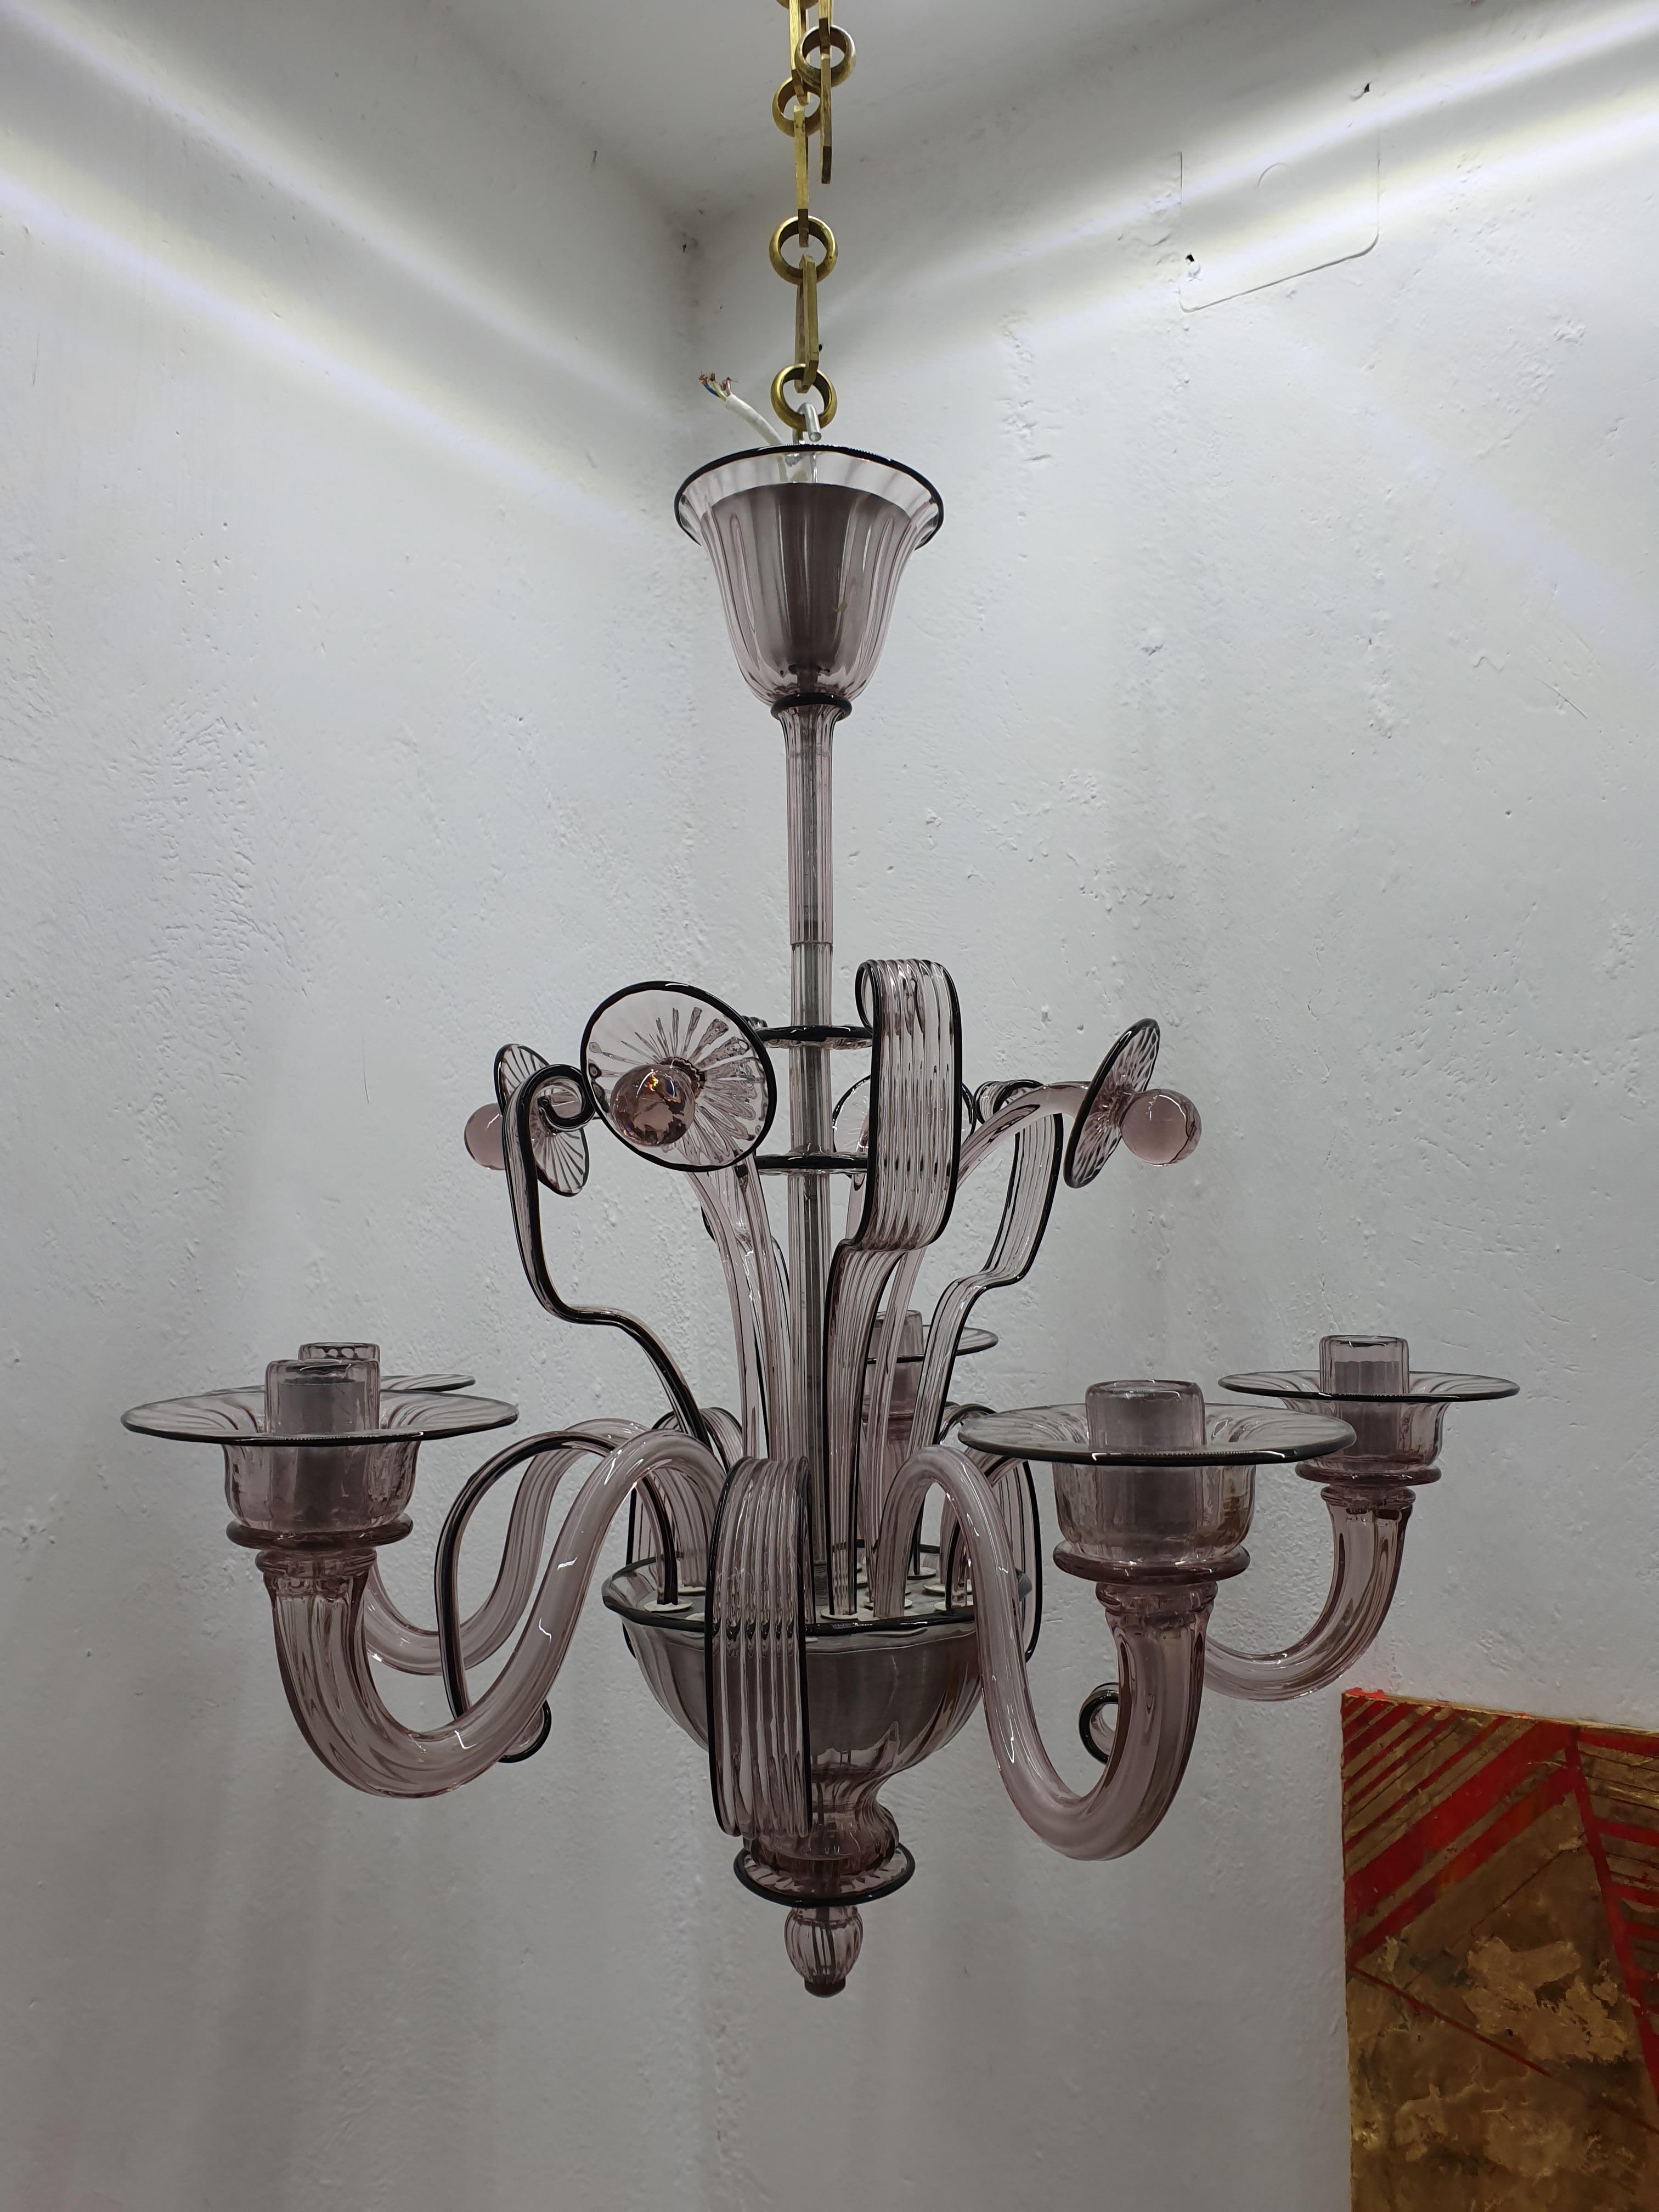 Art Deco Style Chandelier Attributed to Venini Murano Glass, Itlay, circa 1940 For Sale 4